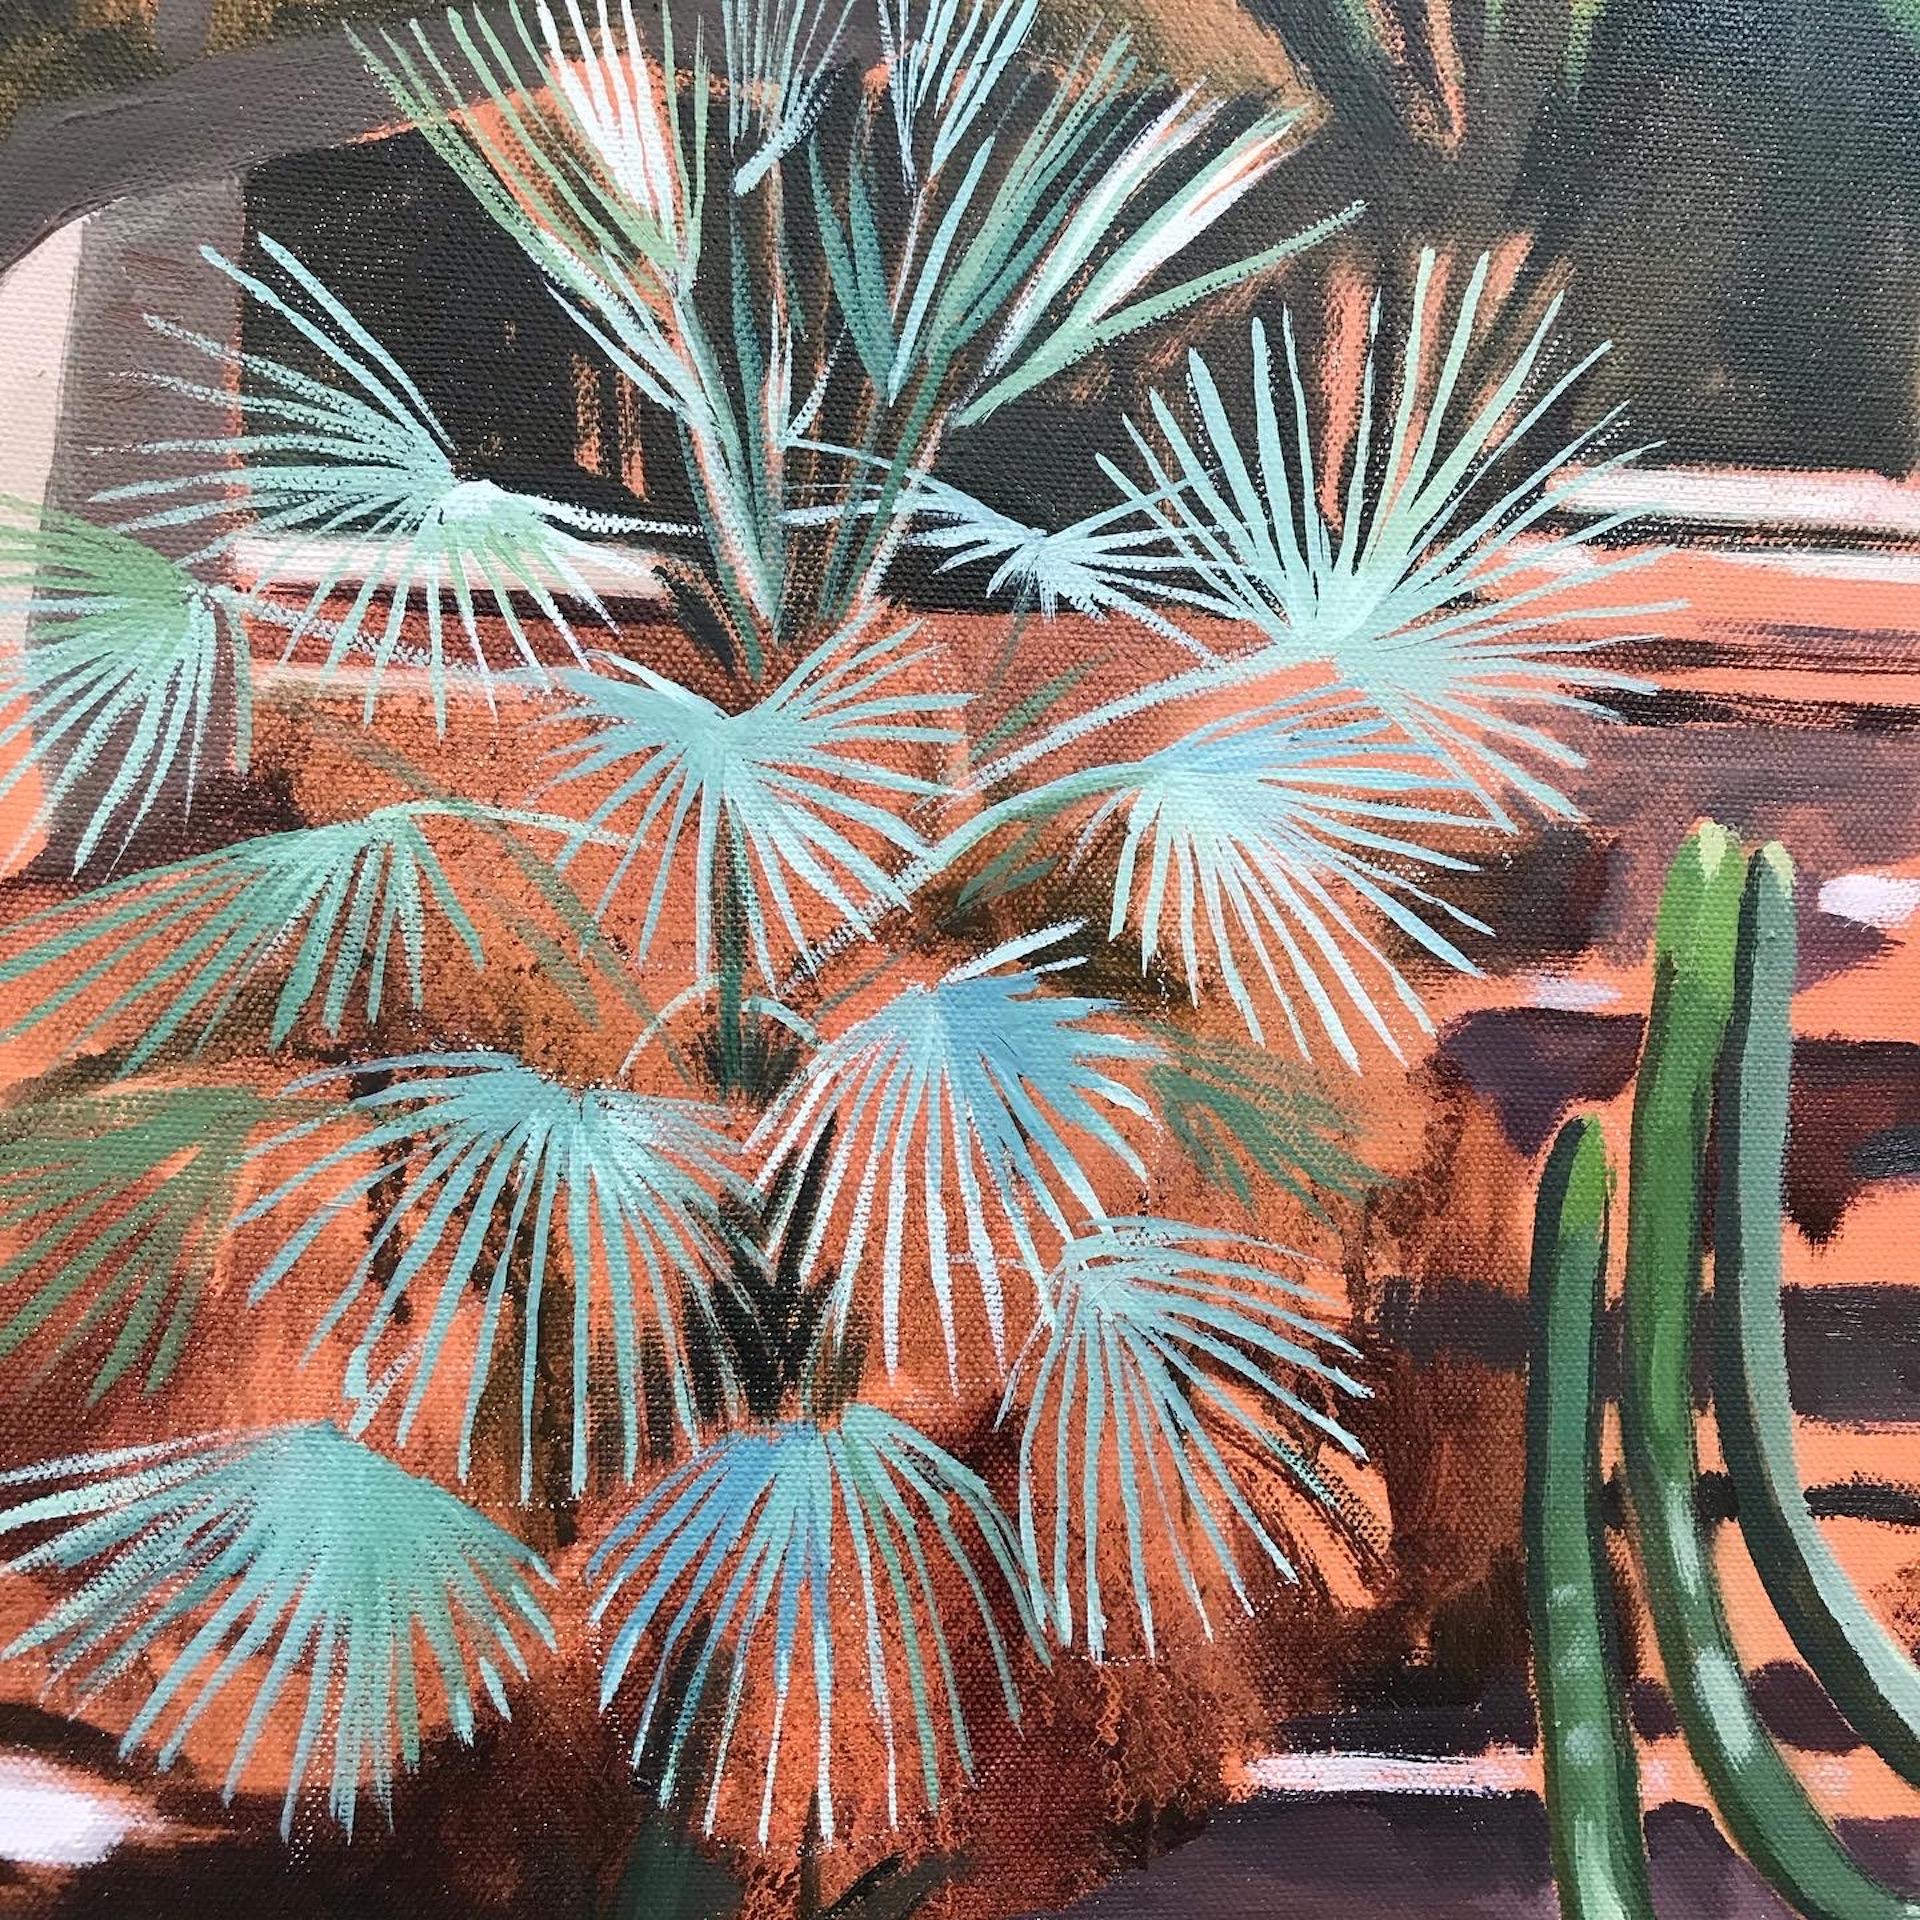 Elaine Kazimierczuk
Cactus and Large Palm, Majorelle Gardens, Morocco
Original Landscape Painting
Oil Paint on Canvas
Canvas Size: H 95cm x W 95cm
Sold Unframed
(Please note that in situ images are purely an indication of how a piece may